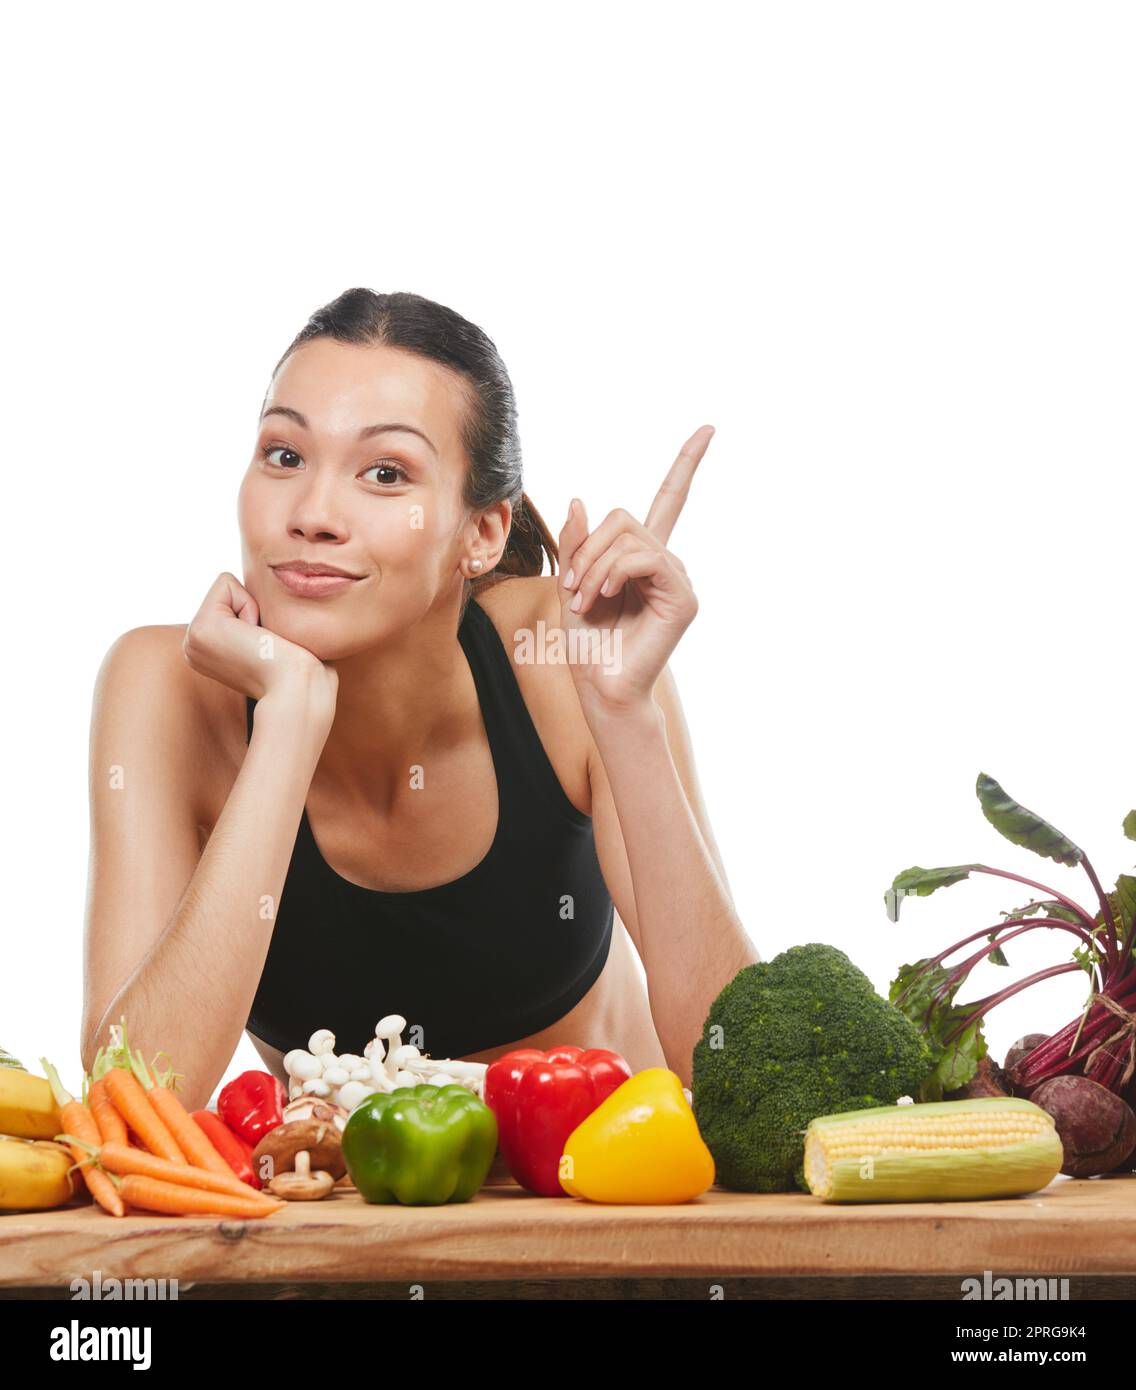 Your health is worth paying attention to. Studio portrait of an attractive young woman posing with a table full of vegetables against a white background. Stock Photo